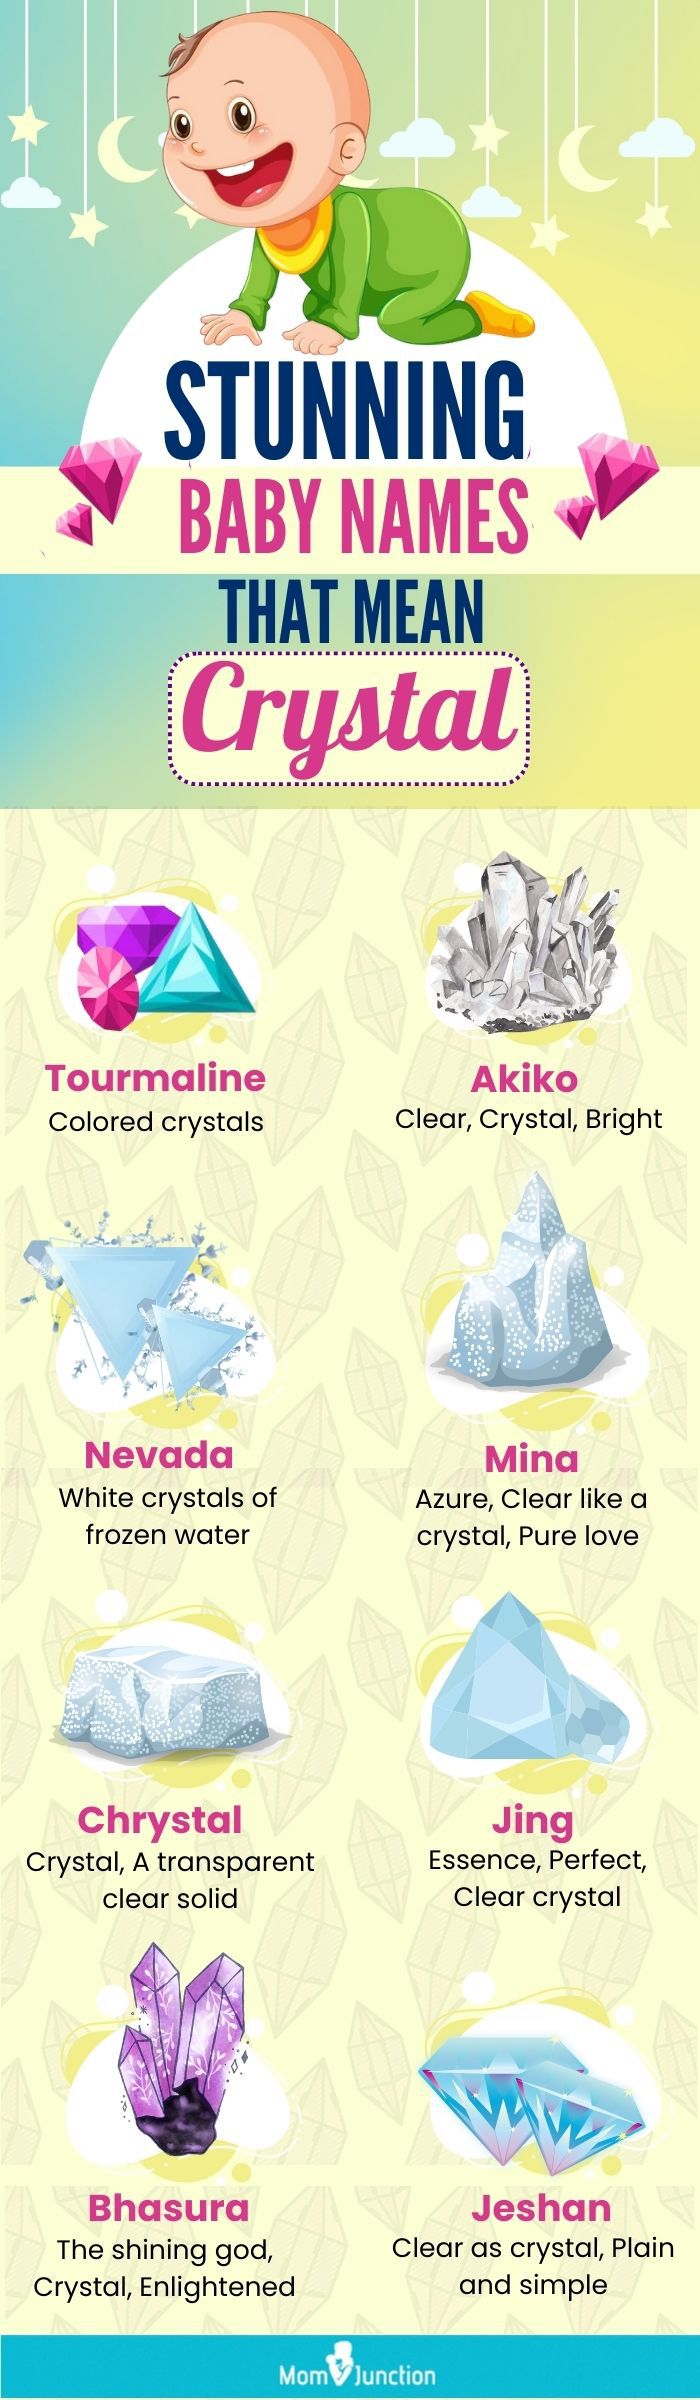 stunning baby names that mean crystal(infographic)